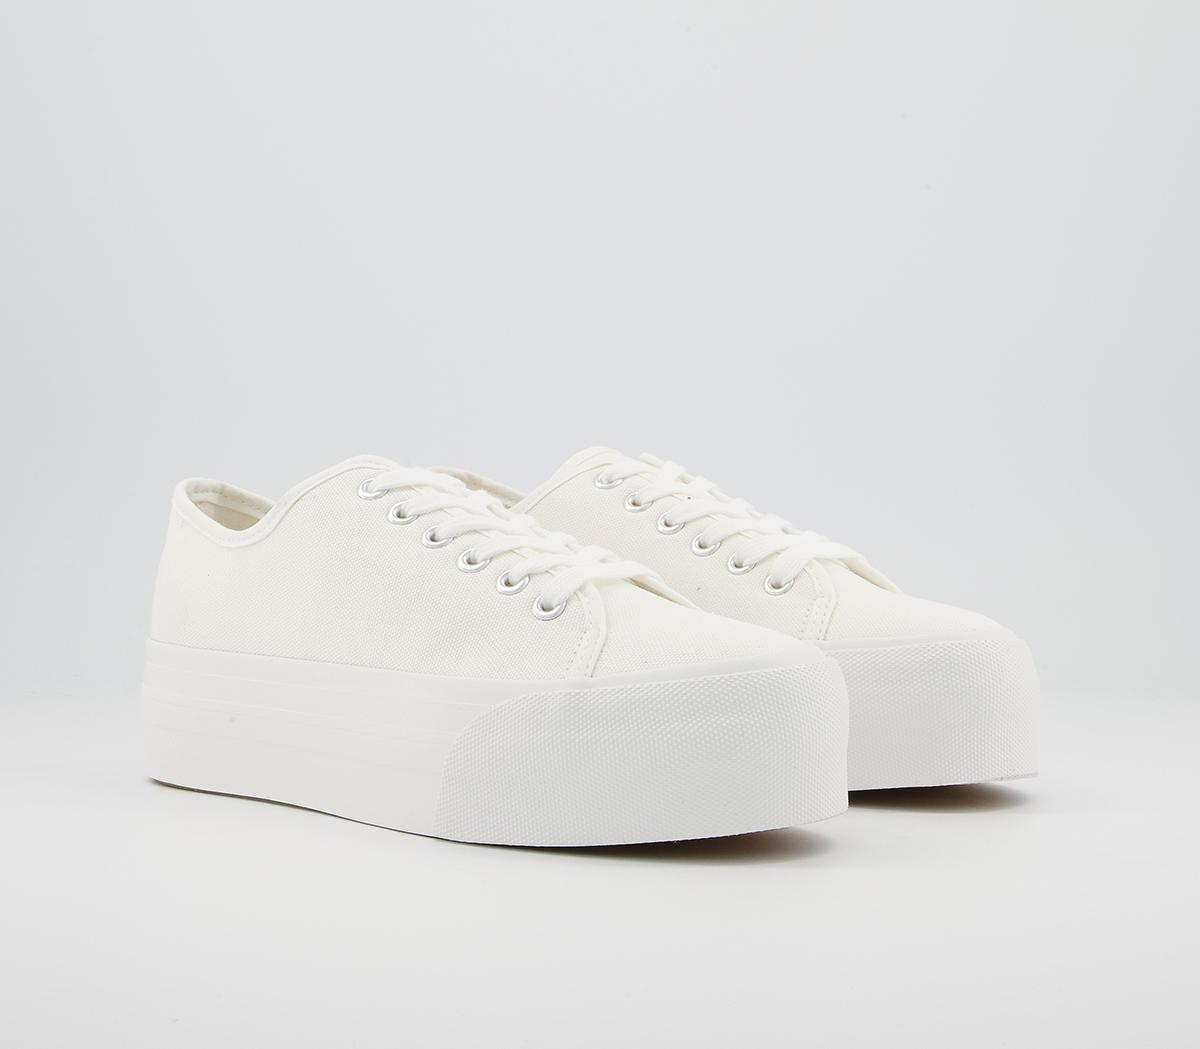 OFFICE Feeling Flatform Lace Up Trainers White Canvas - Flat Shoes for ...